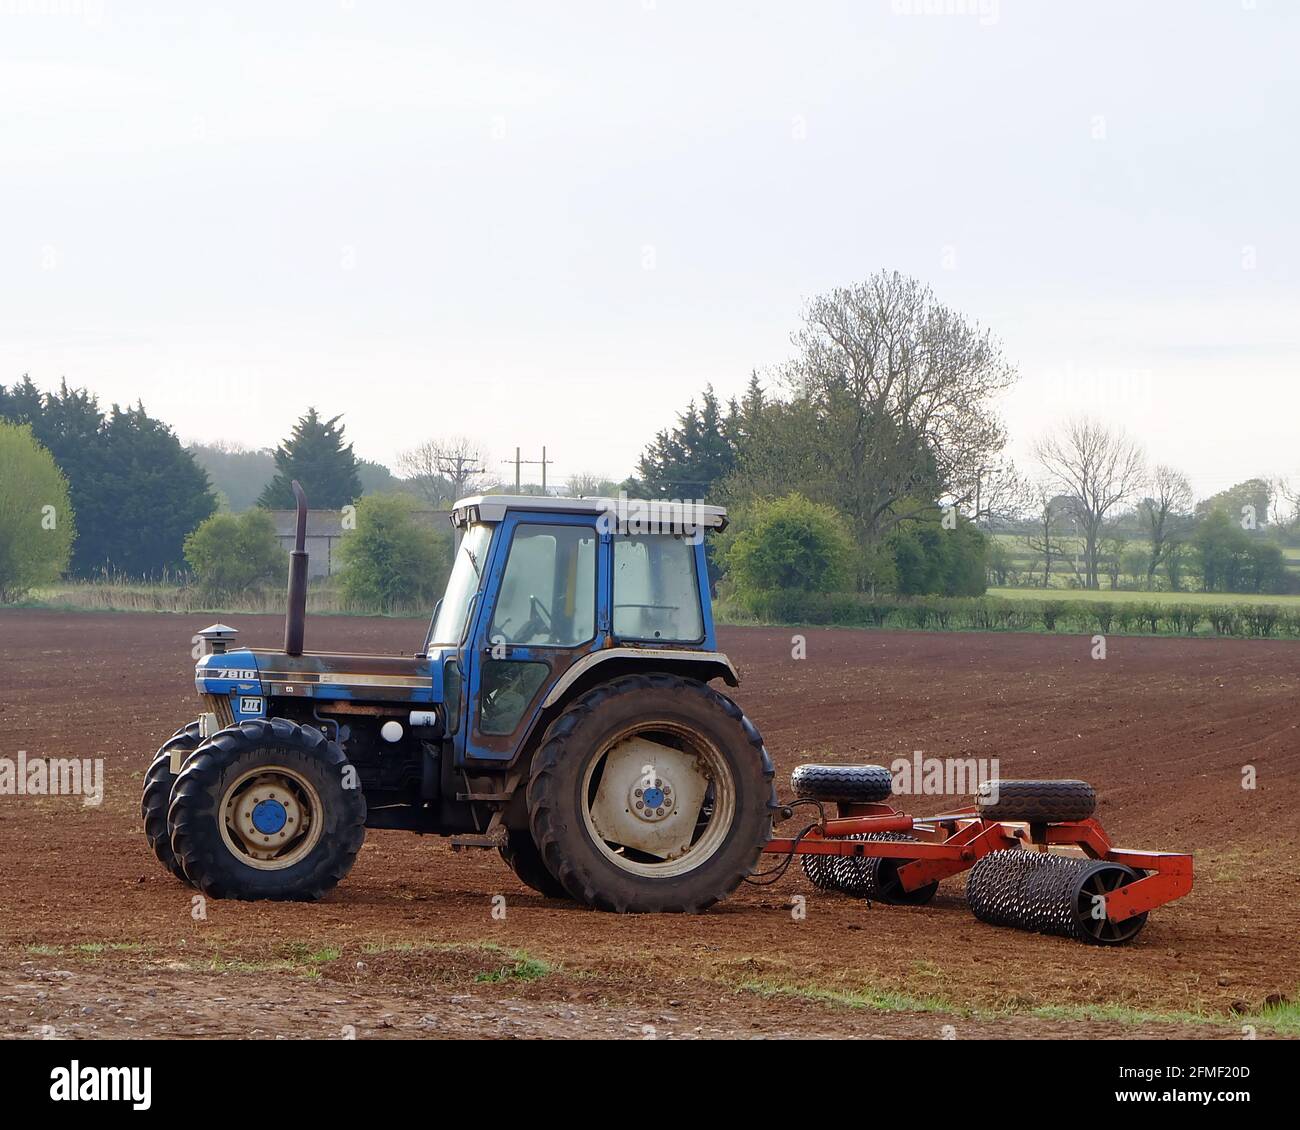 May 2021 - Blue 4x4 New Holland Ford tractor for working the seed bed prior to planting Stock Photo